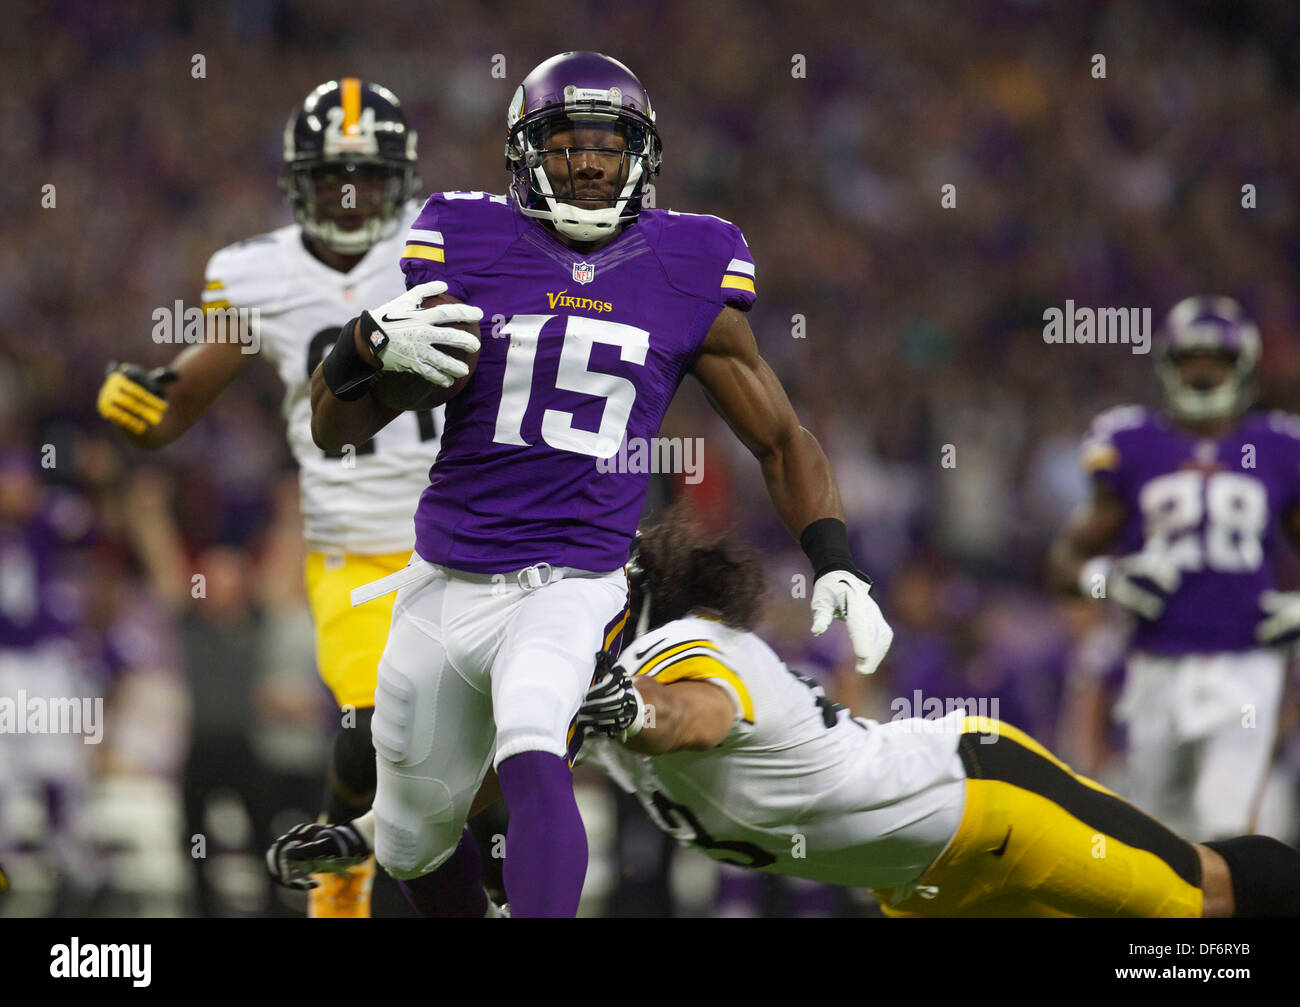 29.09.2013 London, England. Vikings WR Greg Jennings scores the first TD of  the game, during the 7th NFL International Series game in London with, The  Pittsburgh Steelers versus The Minnesota Vikings. From